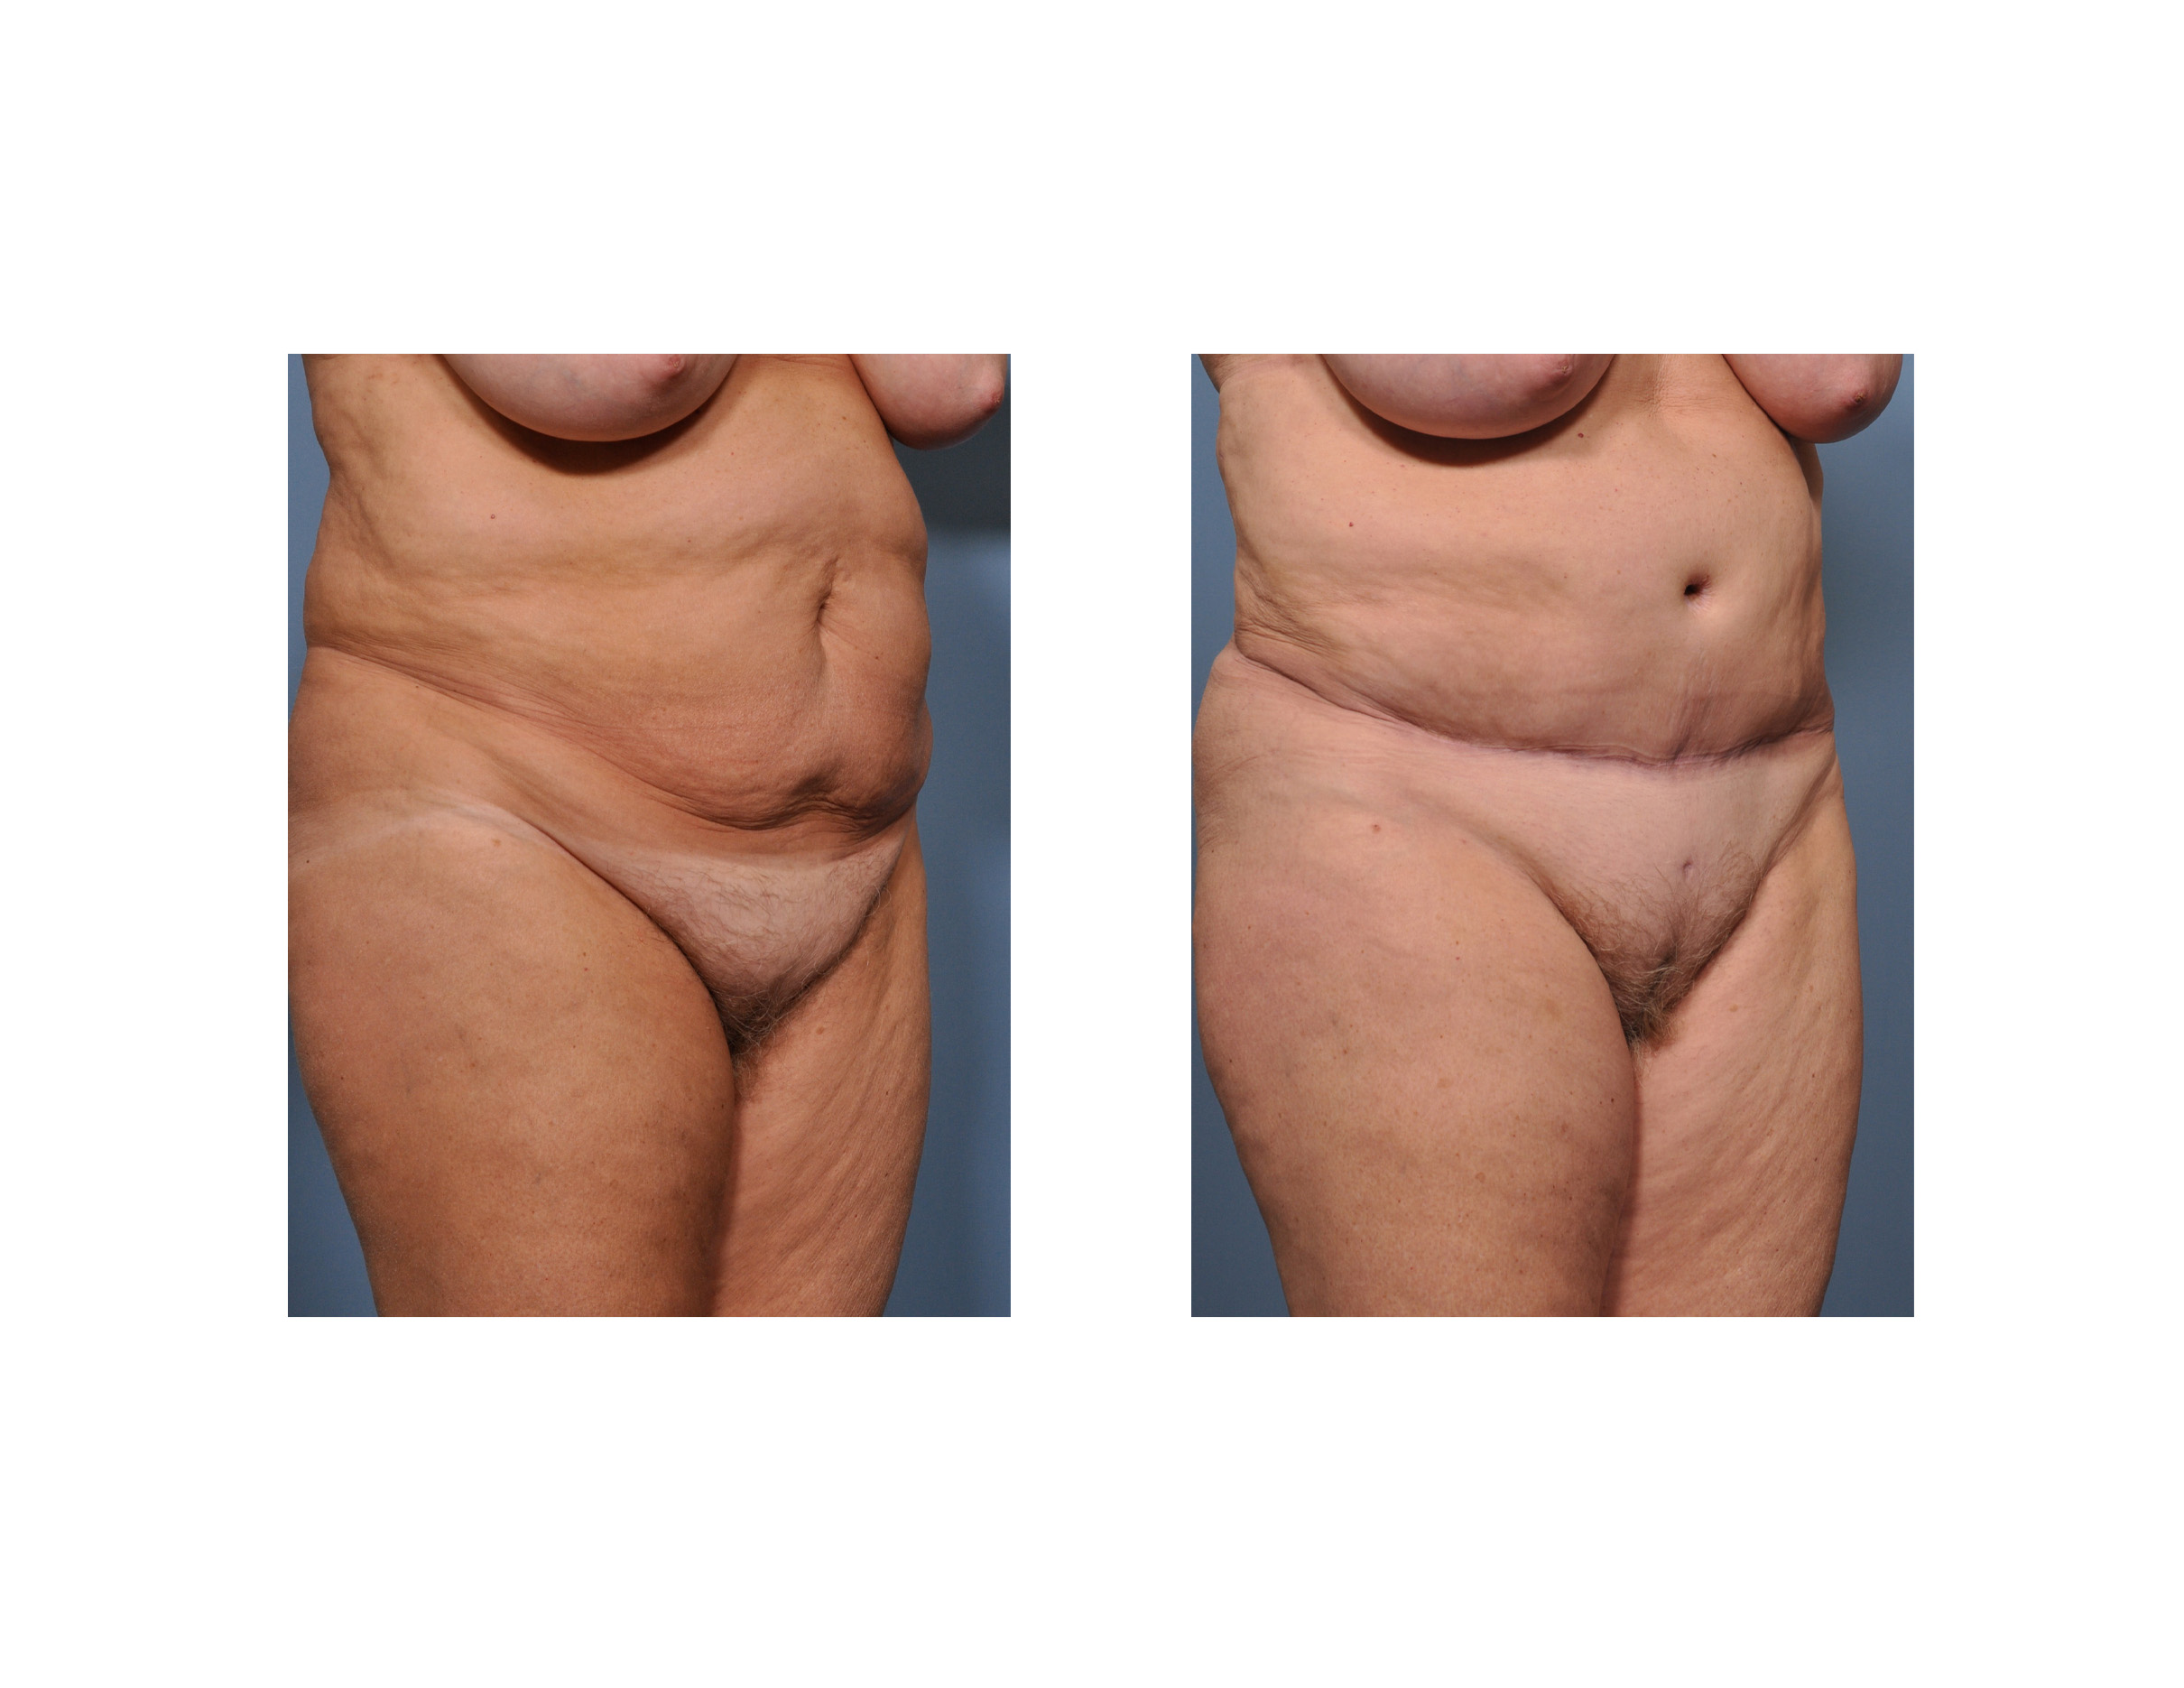 http://eppleyplasticsurgery.com//wp-content/uploads/2014/06/Tummy-Tuck-with-Pubic-Liposuction-results-oblique-view-Dr-Barry-Eppley-Indianapolis.jpg